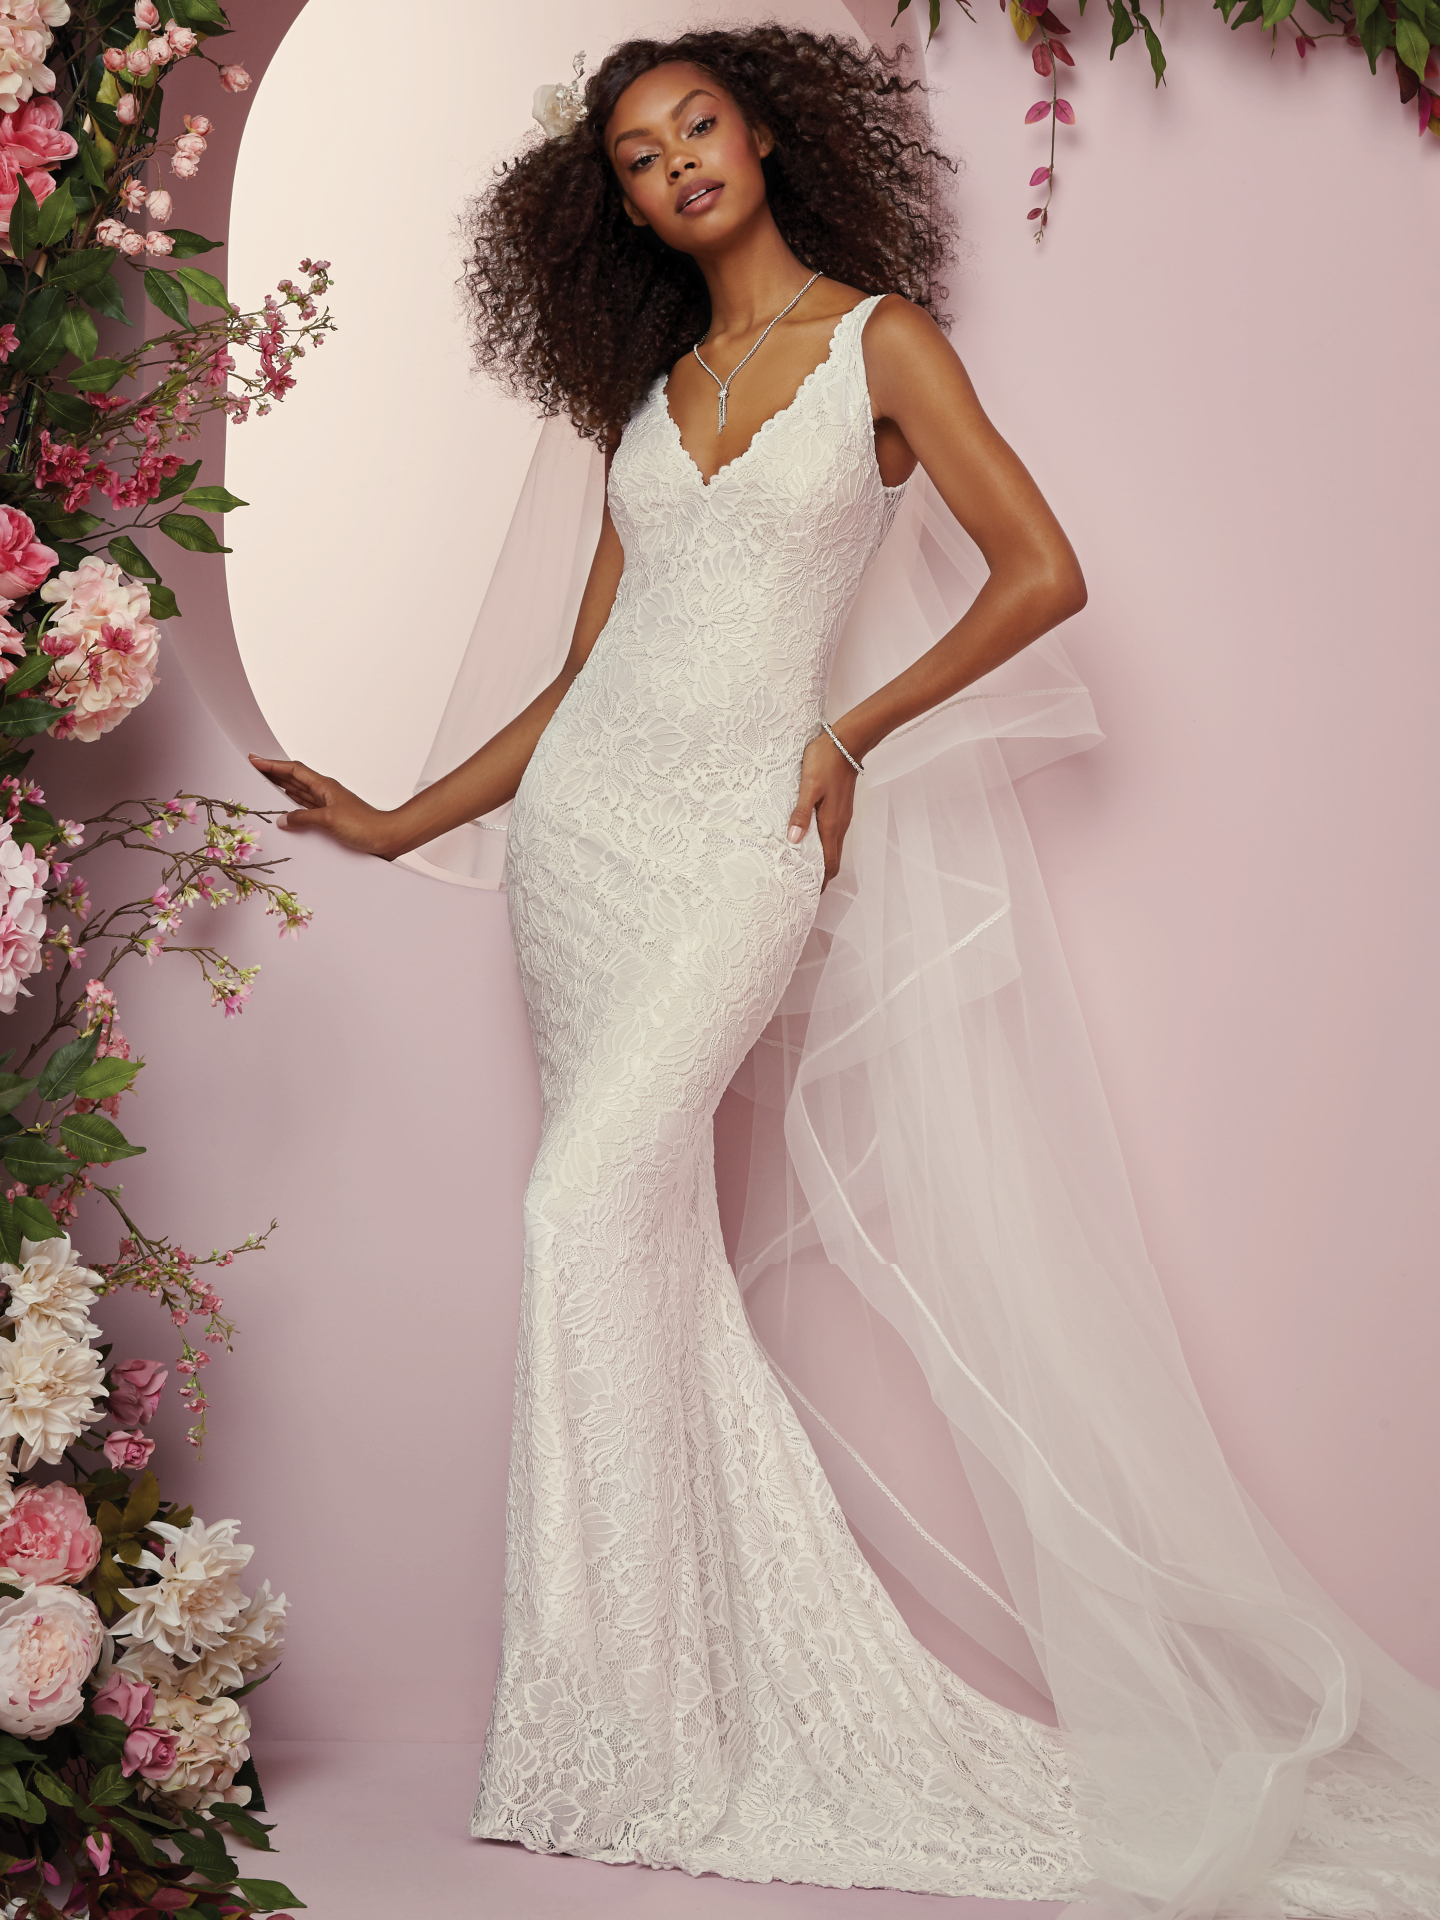 10 relaxed wedding dresses from our Camille collection by Rebecca Ingram - Choose Tina for vintage-inspired lace.